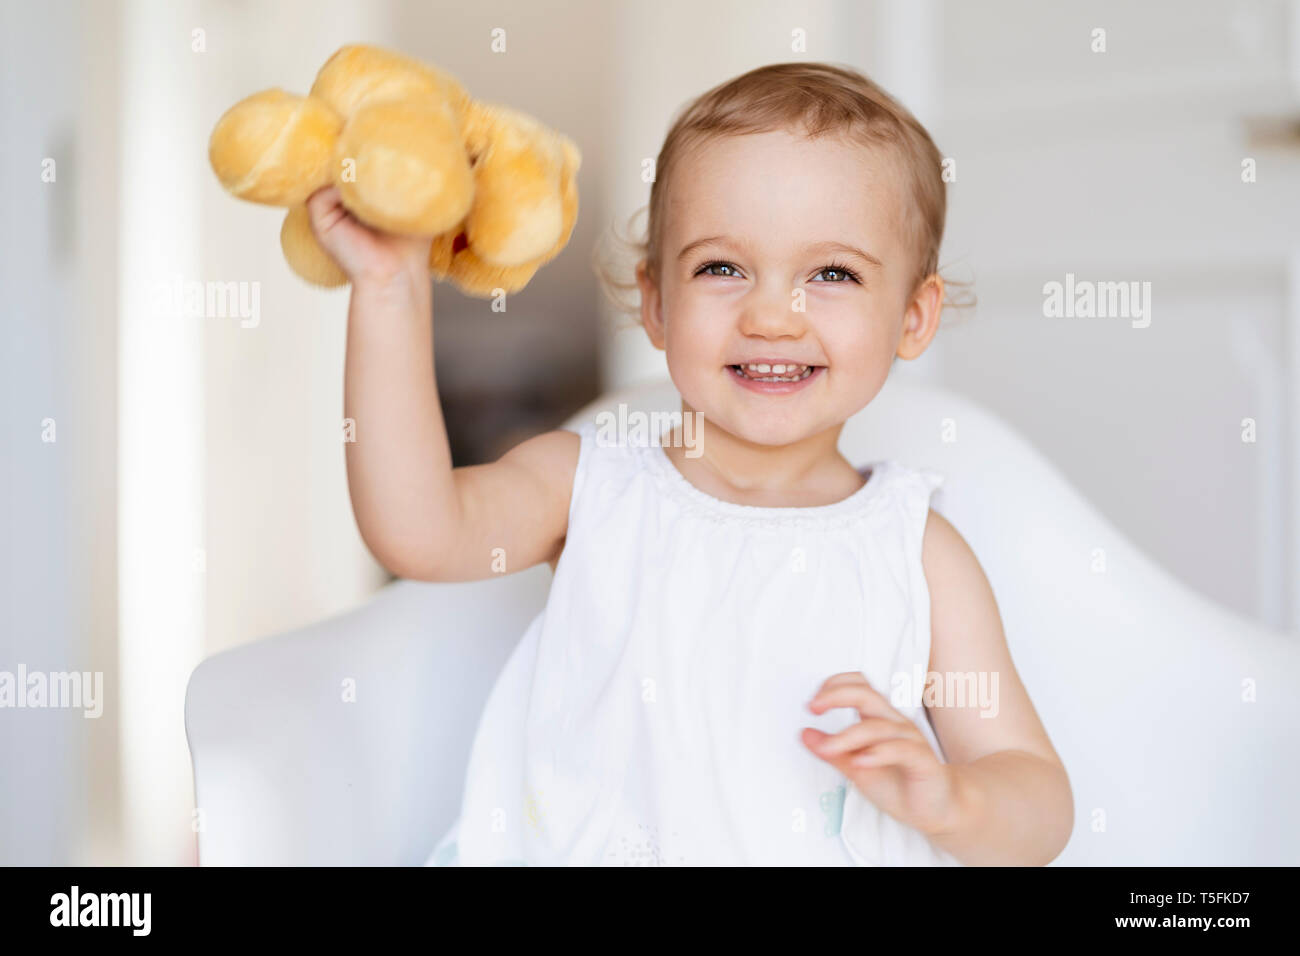 Portrait of smiling toddler girl sitting on a chair holding soft toy Stock Photo